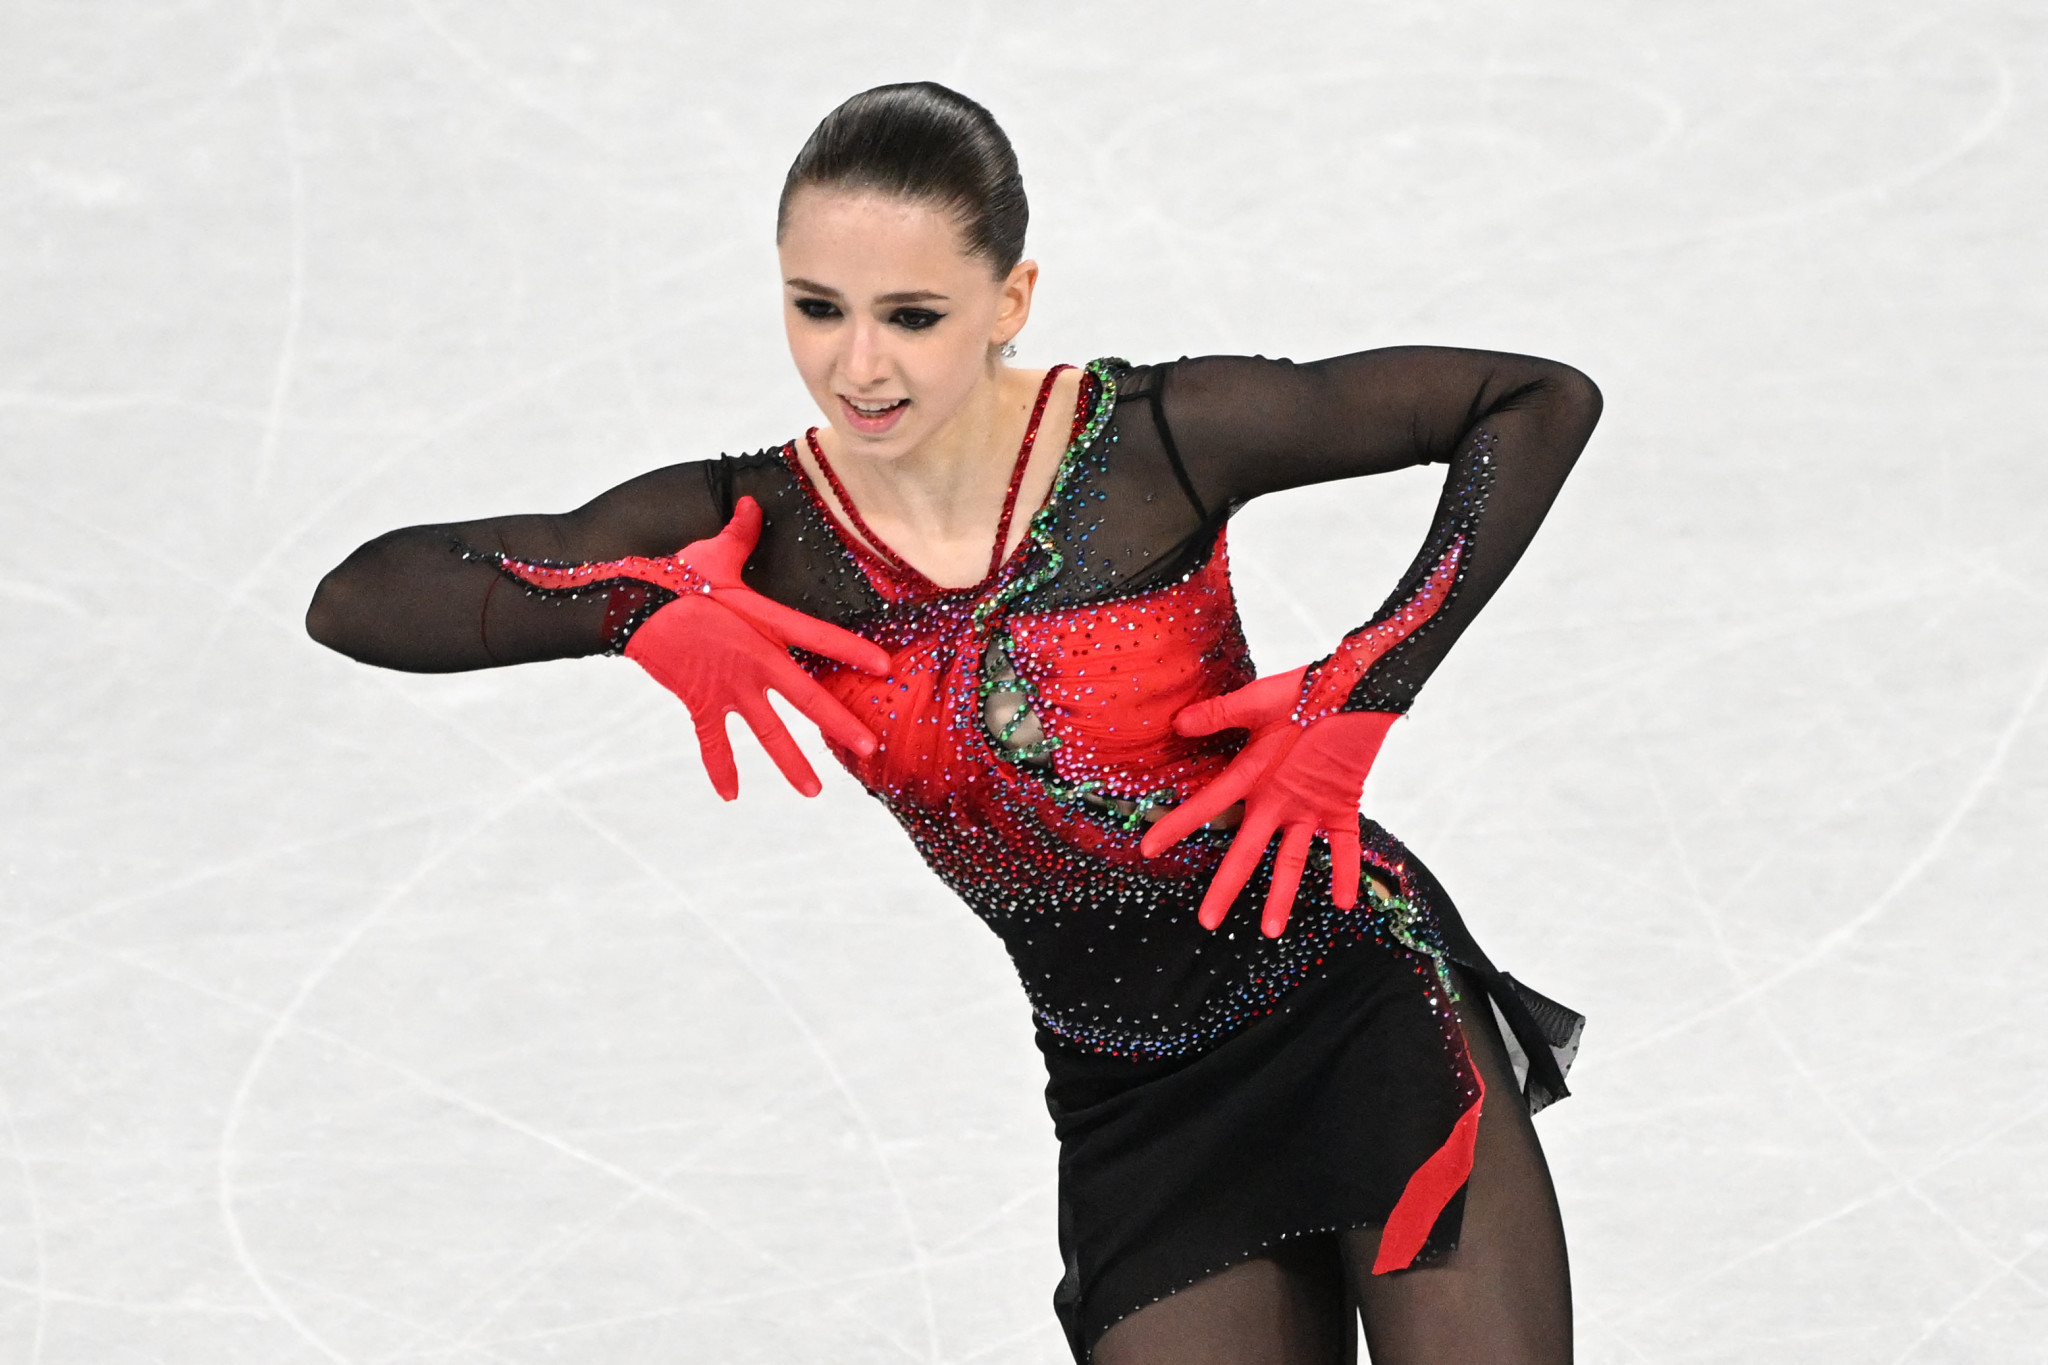 The WADA Executive Committee and Foundation Board are not expected to discuss the case of Russian figure skater Kamila Valieva, which lies with RUSADA  ©Getty Images